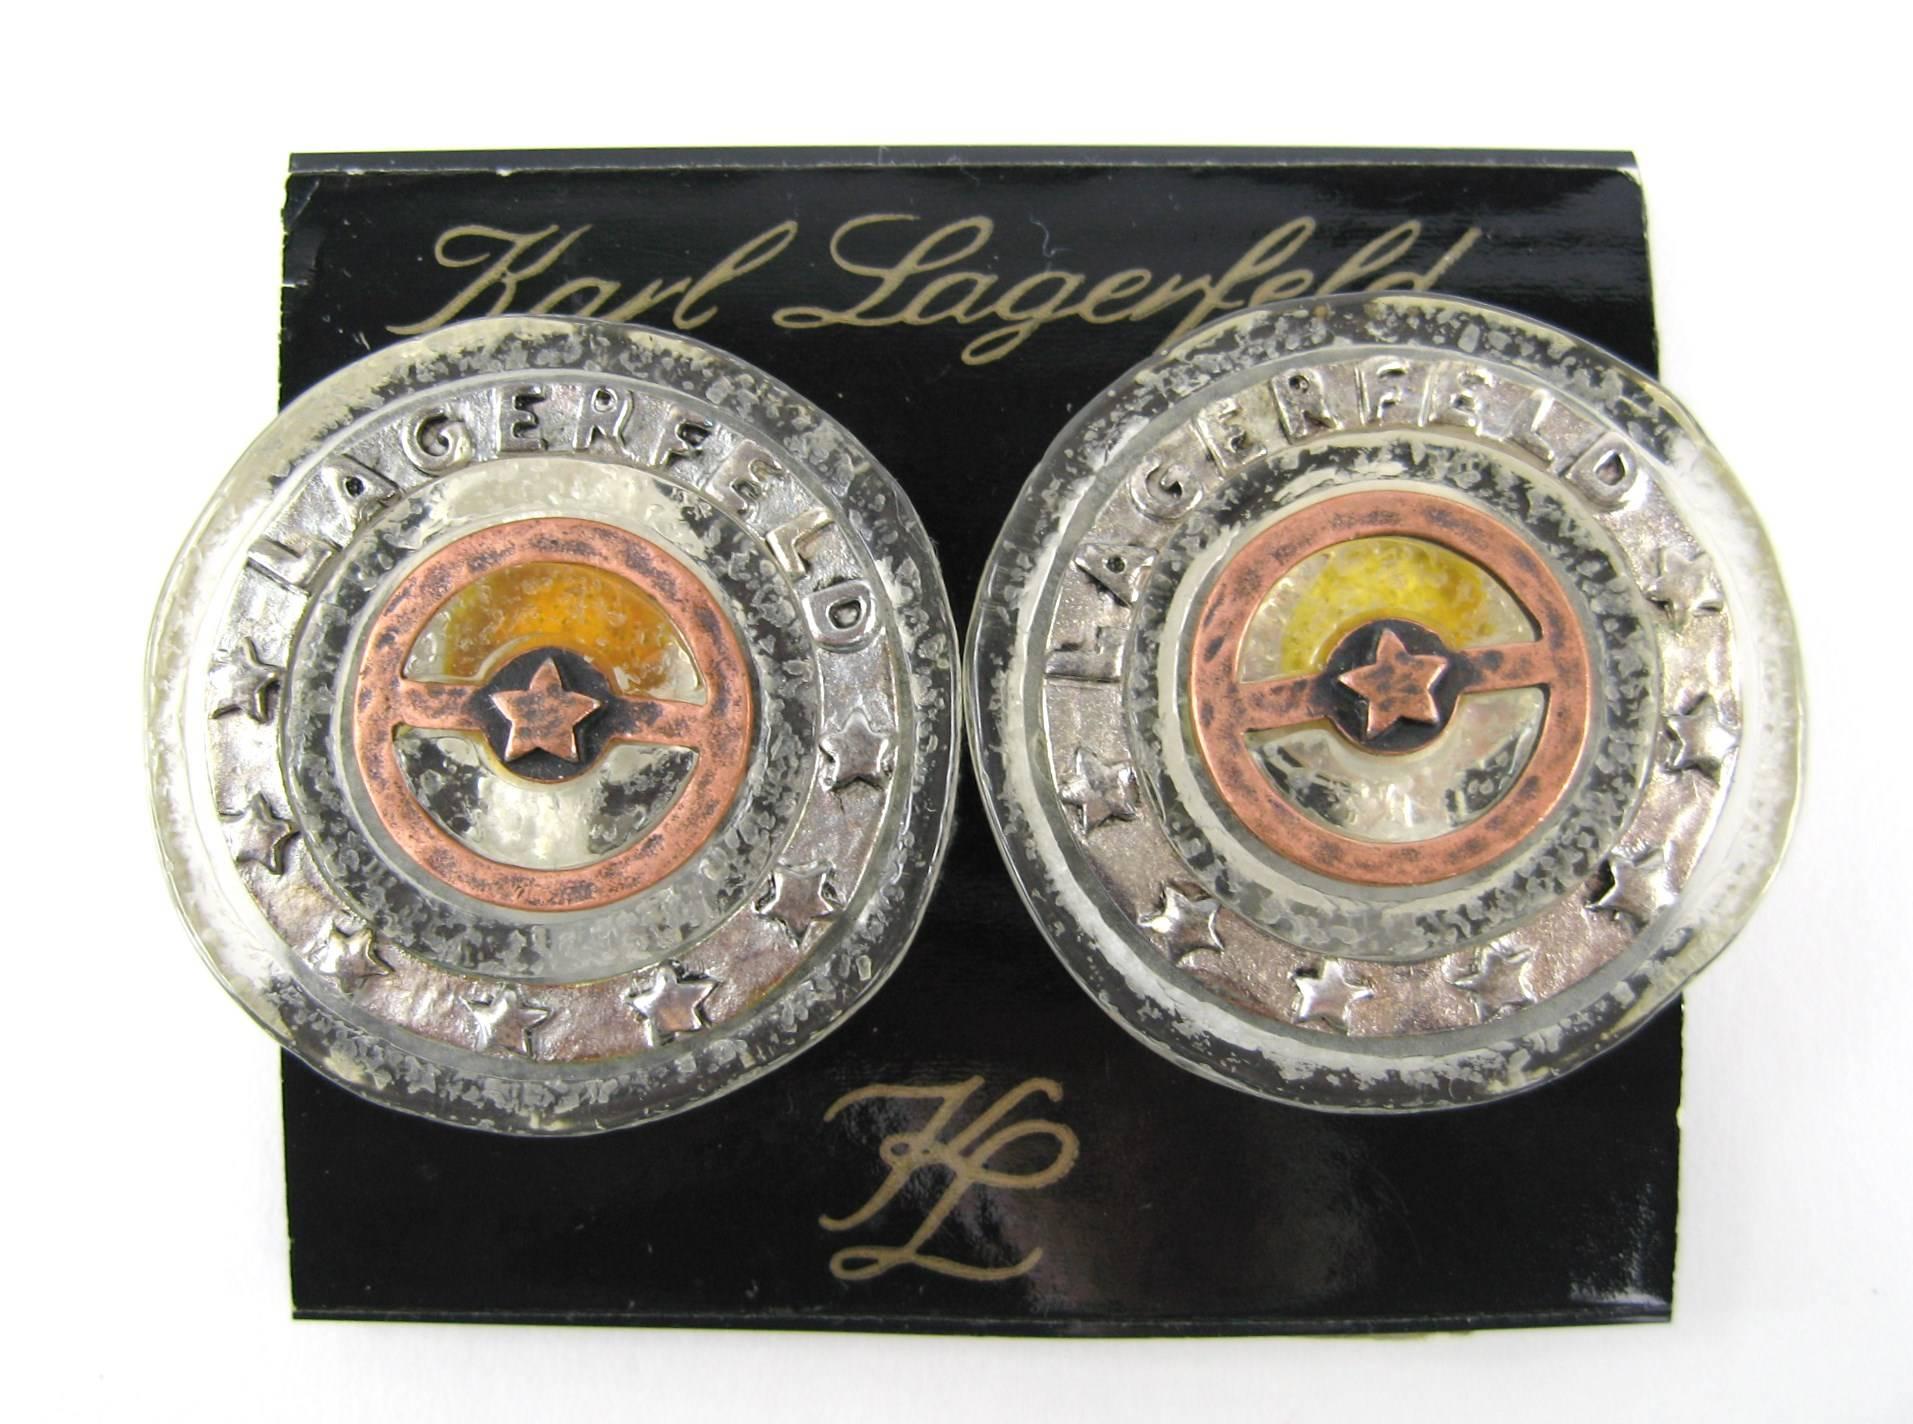 Large Karl Lagerfeld Disc earrings New Old Stock. Lucite with copper colored center, with the monogrammed surrounding. Measuring about 1.5 inches in diameter. This is out of a massive collection of Contemporary designer clothing as well as Hopi,